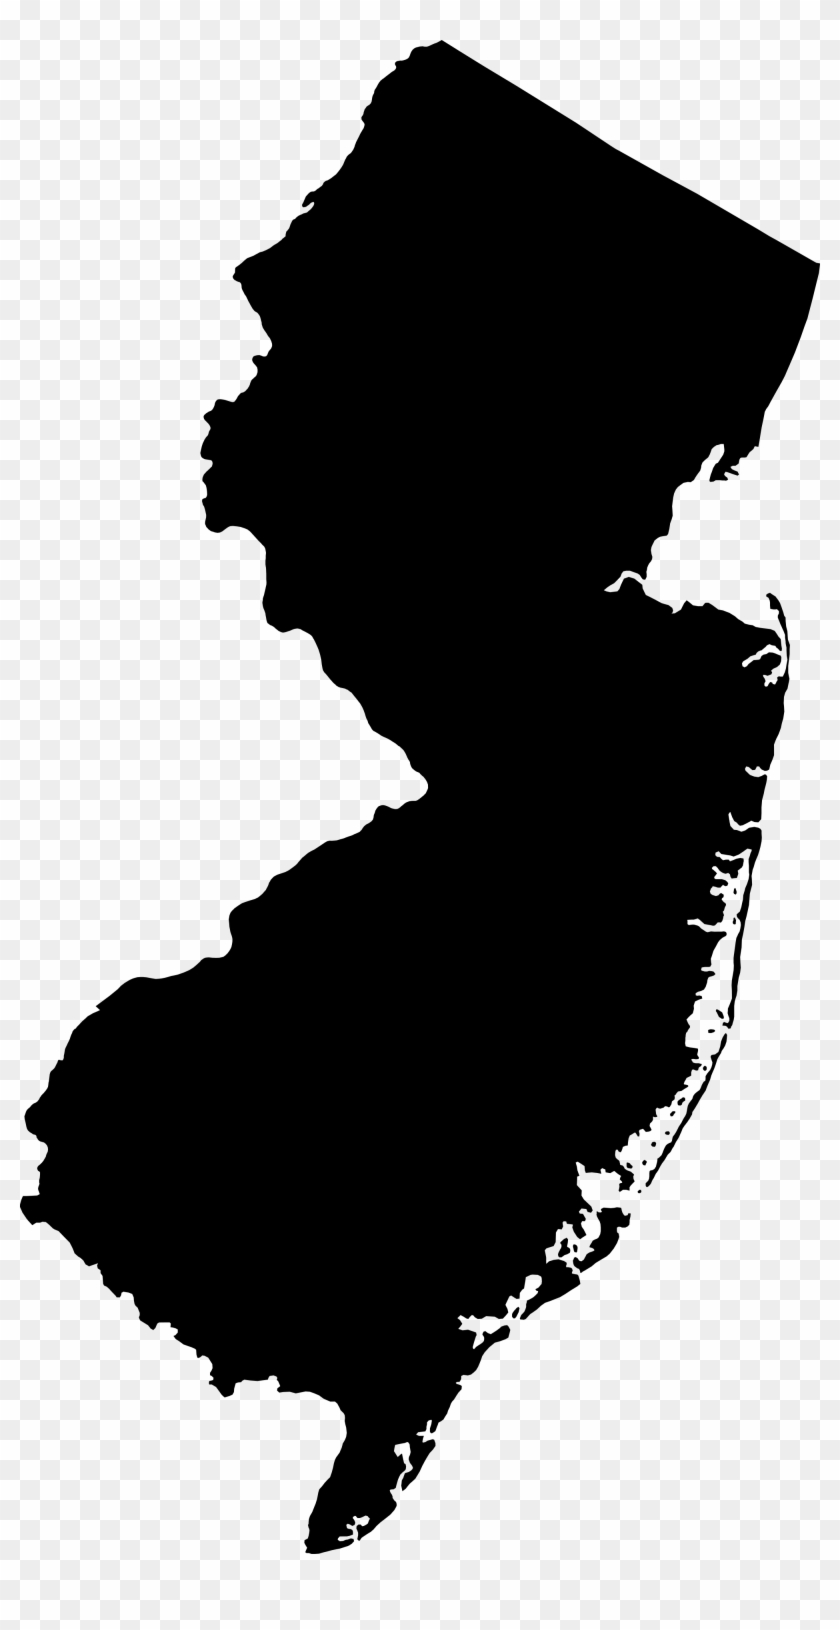 New Jersey Outline Shaded Map - New Jersey Black Clipart #4896682